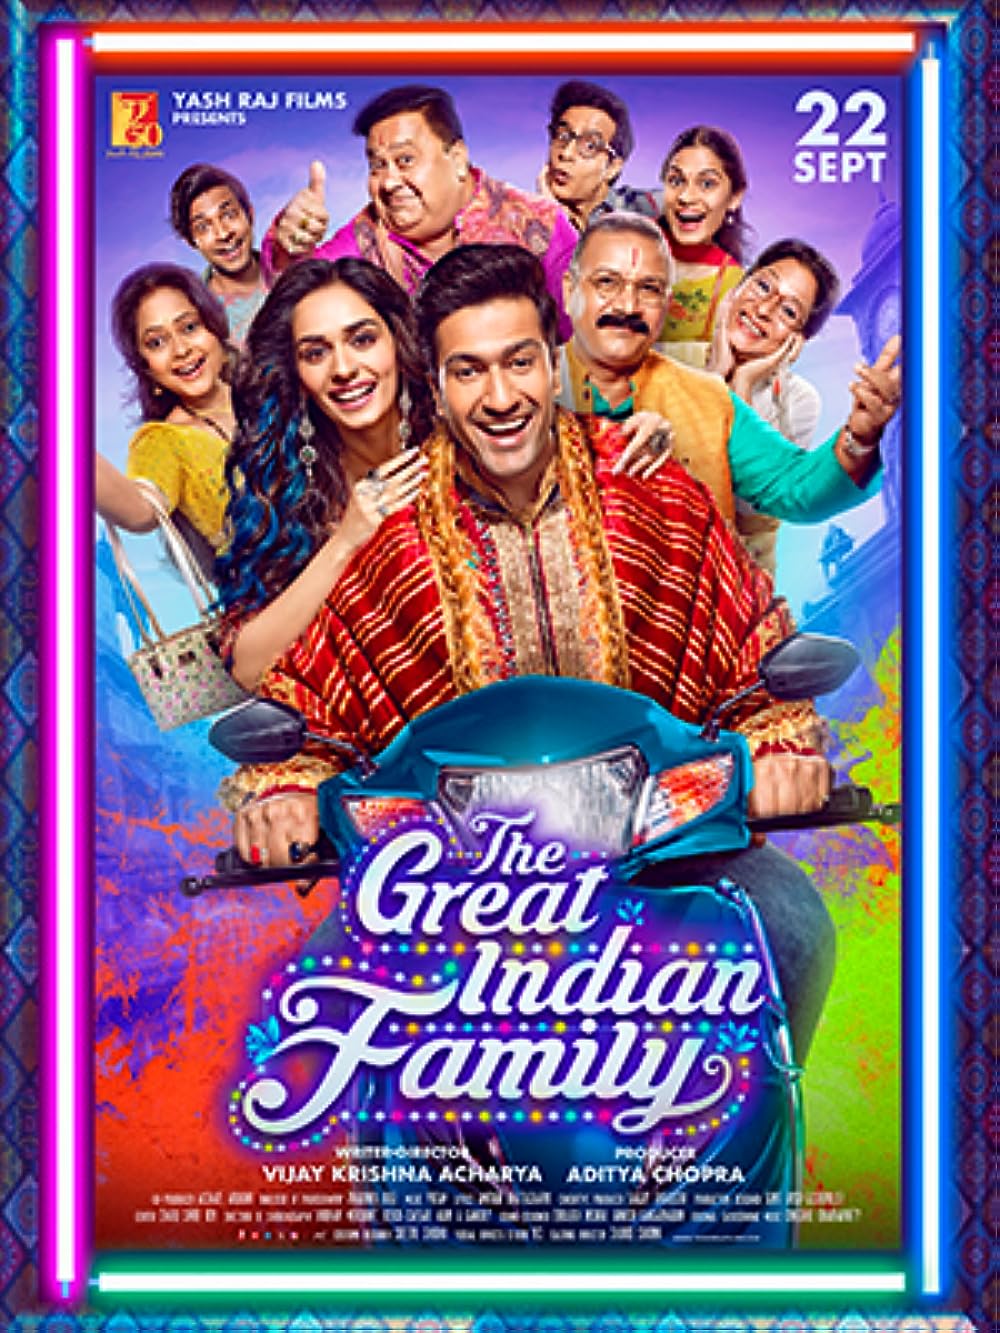 assets/img/movie/The Great Indian Family 2023 Hindi 1080p HDRip ESub 2.5GB Download.jpg